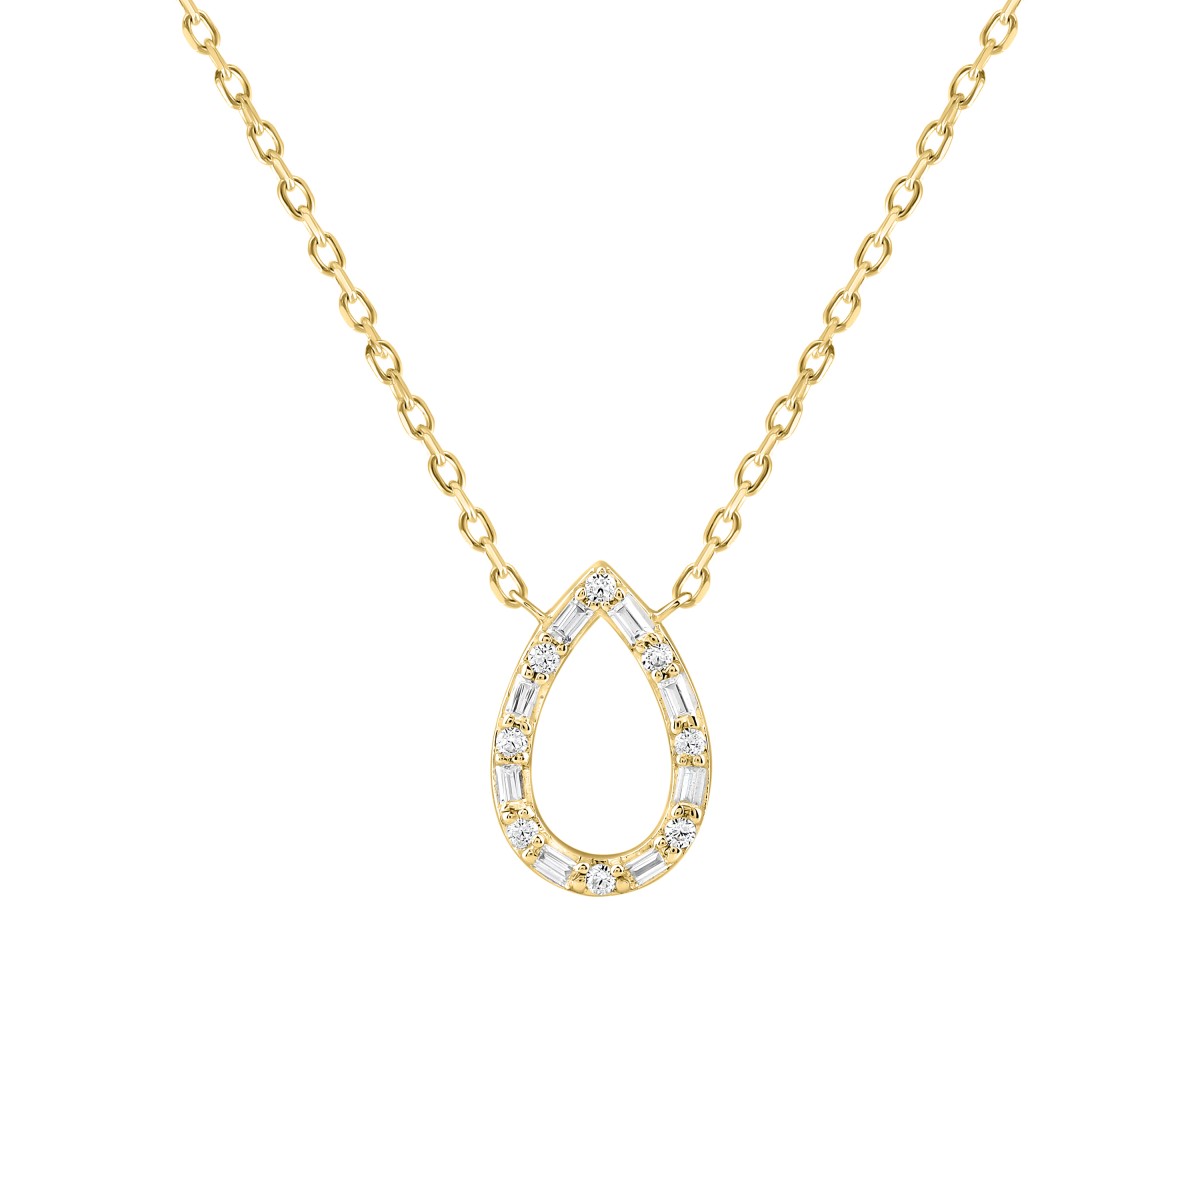 14K YELLOW GOLD 1/6CT ROUND/BAGUETTE DIAMOND LADIES PENDANT WITH CHAIN  